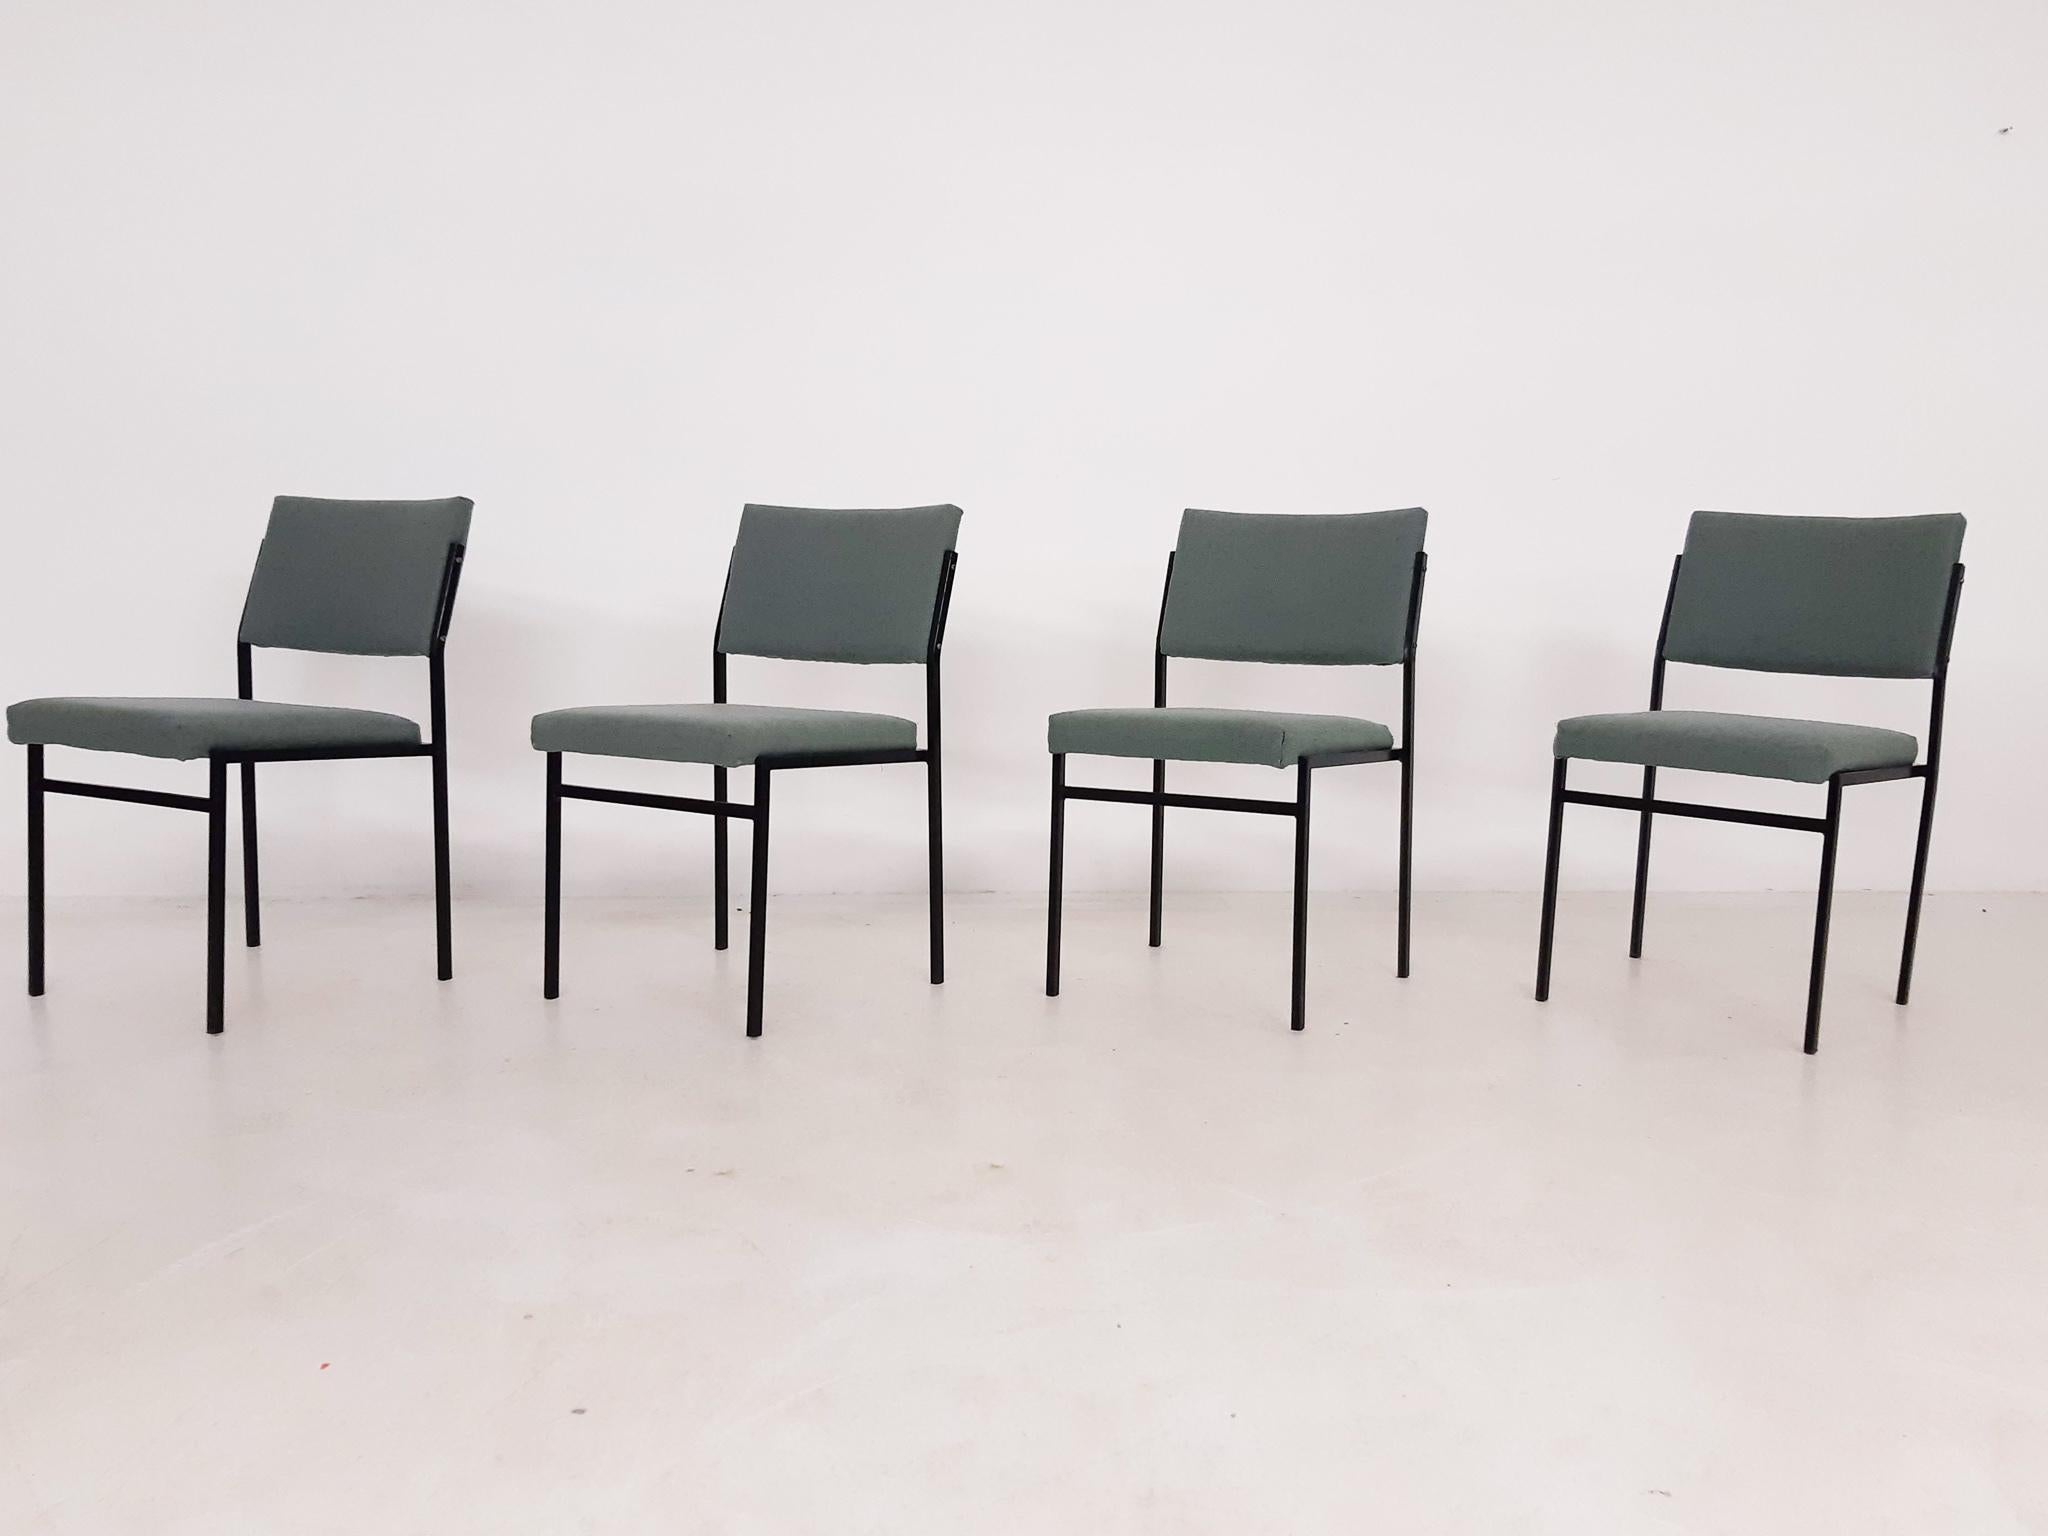 50 vintage metal stacking chairs with black metal frame and green upholstery, some chairs have some stains. Manufactured in the Netherlands in 1960s
Price per piece.
Gijs Van Der Sluis was a Dutch furniture designer from the midcentury. He started